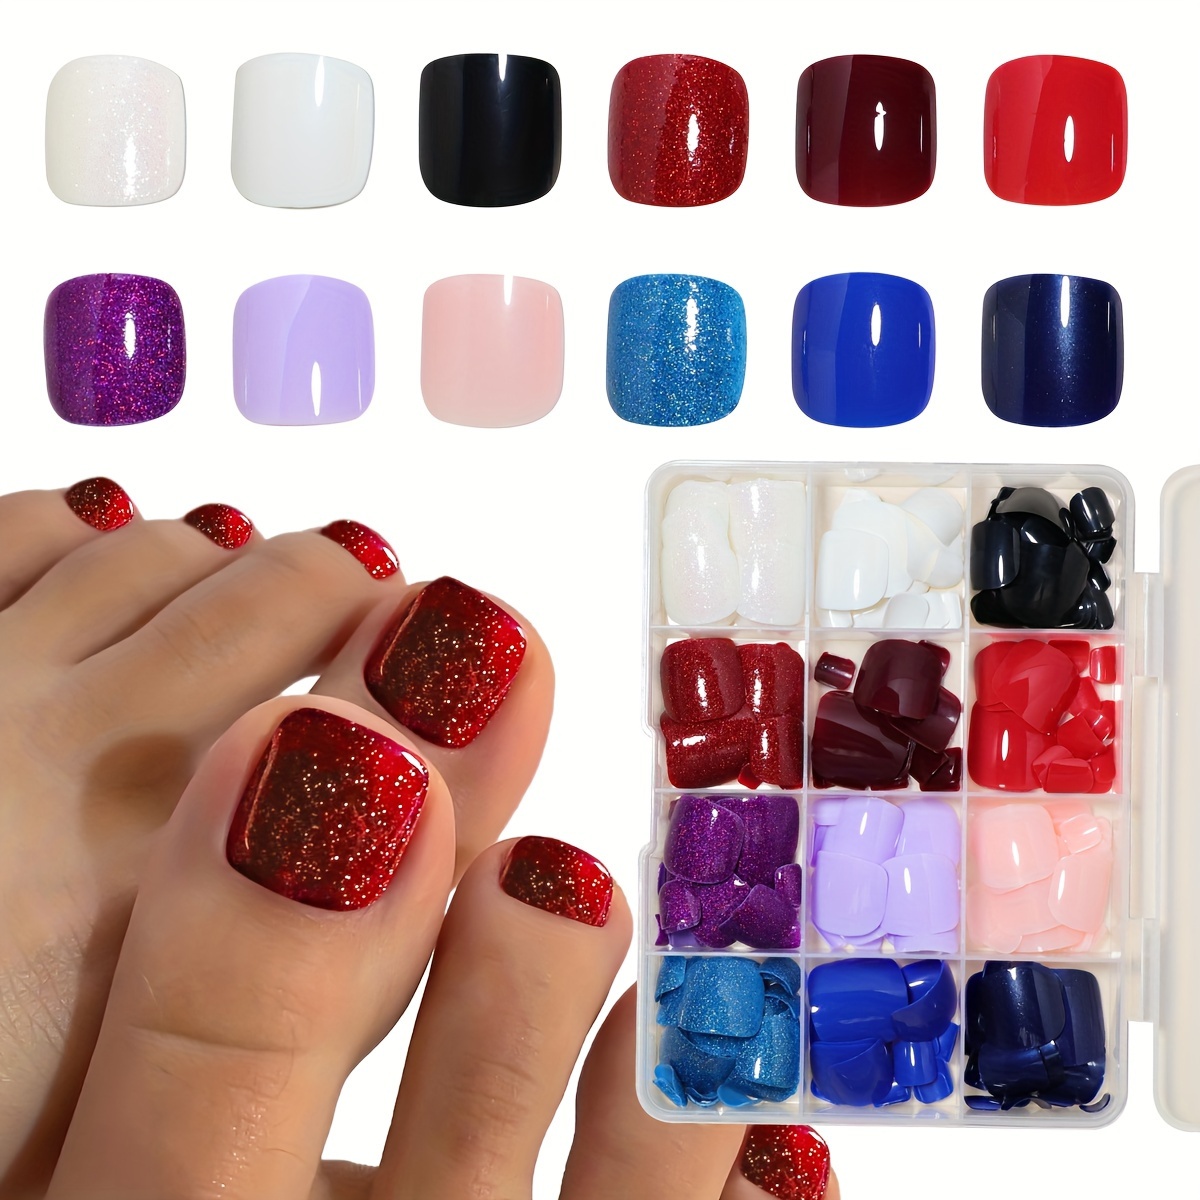 

Glitter & Solid Color Toe Nail Tips Set, 12 Grid Box, Pre-glued Press-on Pedicure Nails, Galaxy & Classic Tones, Easy Application Fake Nails For Toes, Home Salon Nail Art Kit